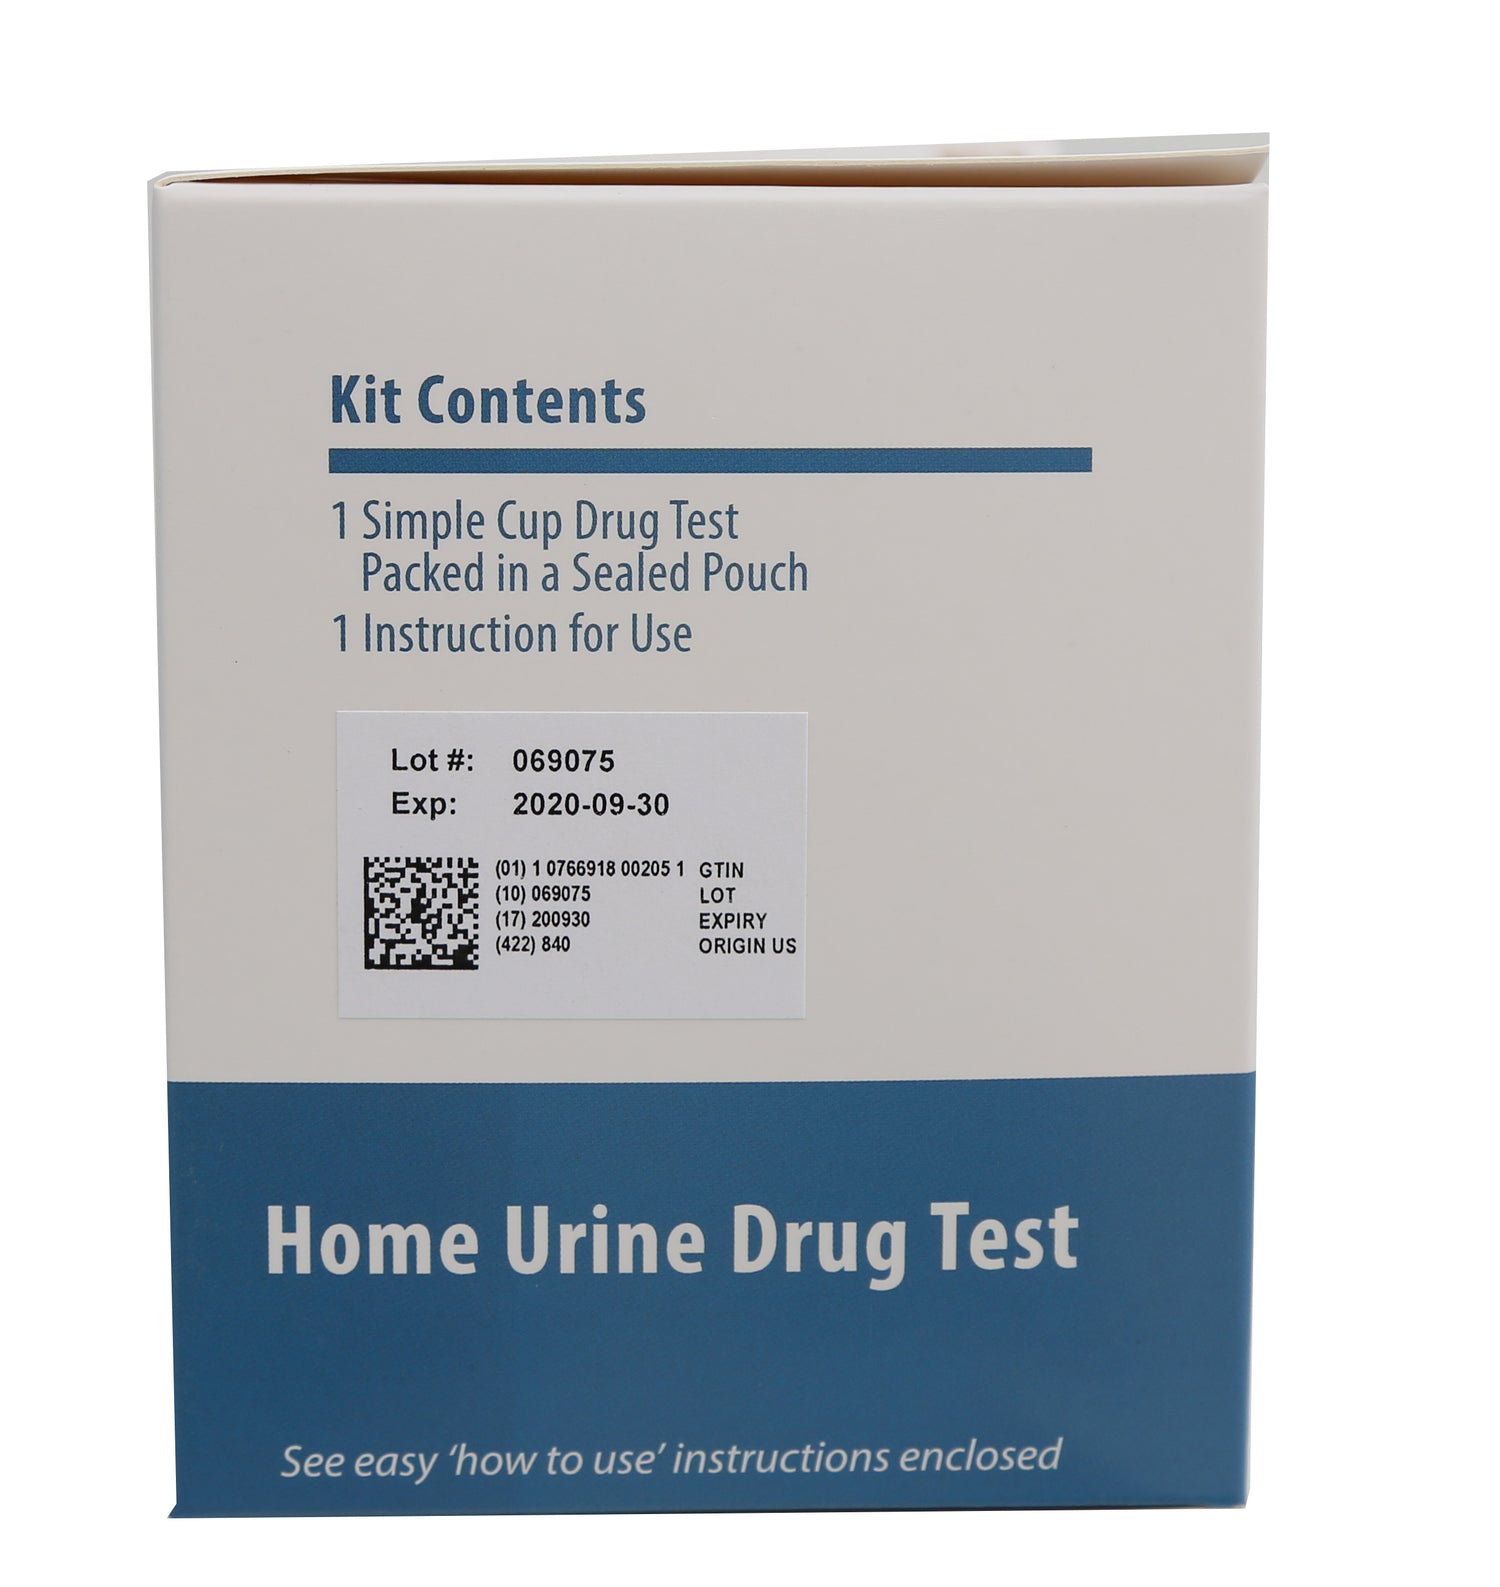 Instant-view® PLUS Simple Cup Multi-Drug Home Test (7 drugs) - Rapid One Step Test